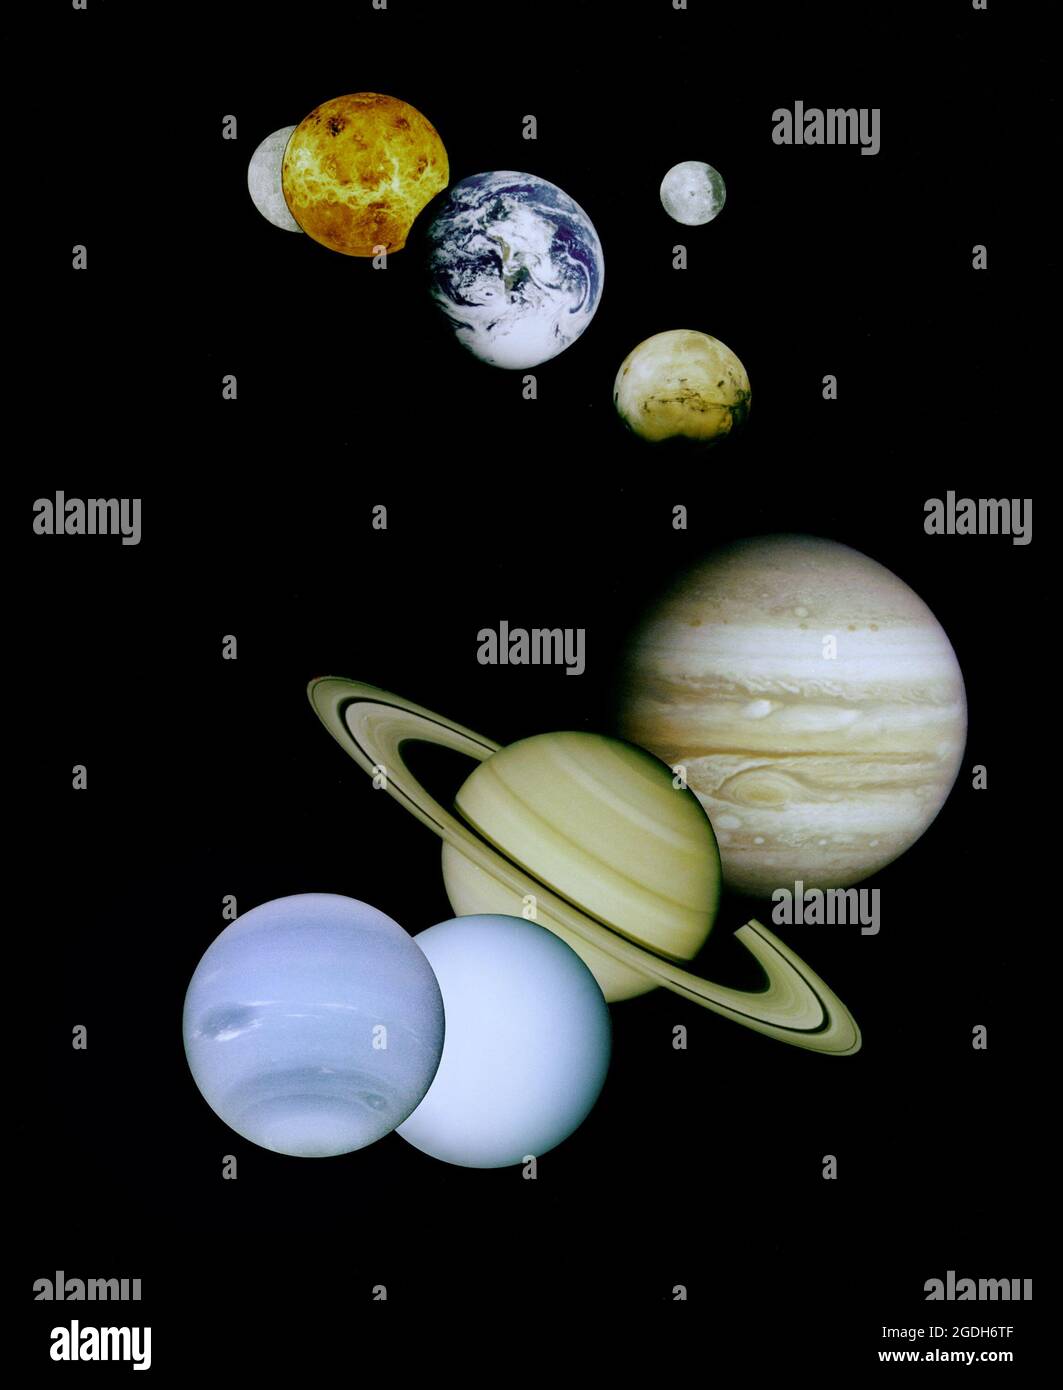 A photo montage of all the planets in the solar system, using images taken by different spacecraft.  The Mercury image was taken by Mariner 10, the Venus image by Magellan, the Earth image by Galileo, the Mars image by Viking, and the Jupiter, Saturn, Uranus and Neptune images by Voyager. The inner planets (Mercury, Venus, Earth, Moon, and Mars) are roughly to scale to each other; the outer planets (Jupiter, Saturn, Uranus, and Neptune) are roughly to scale to each other. Stock Photo